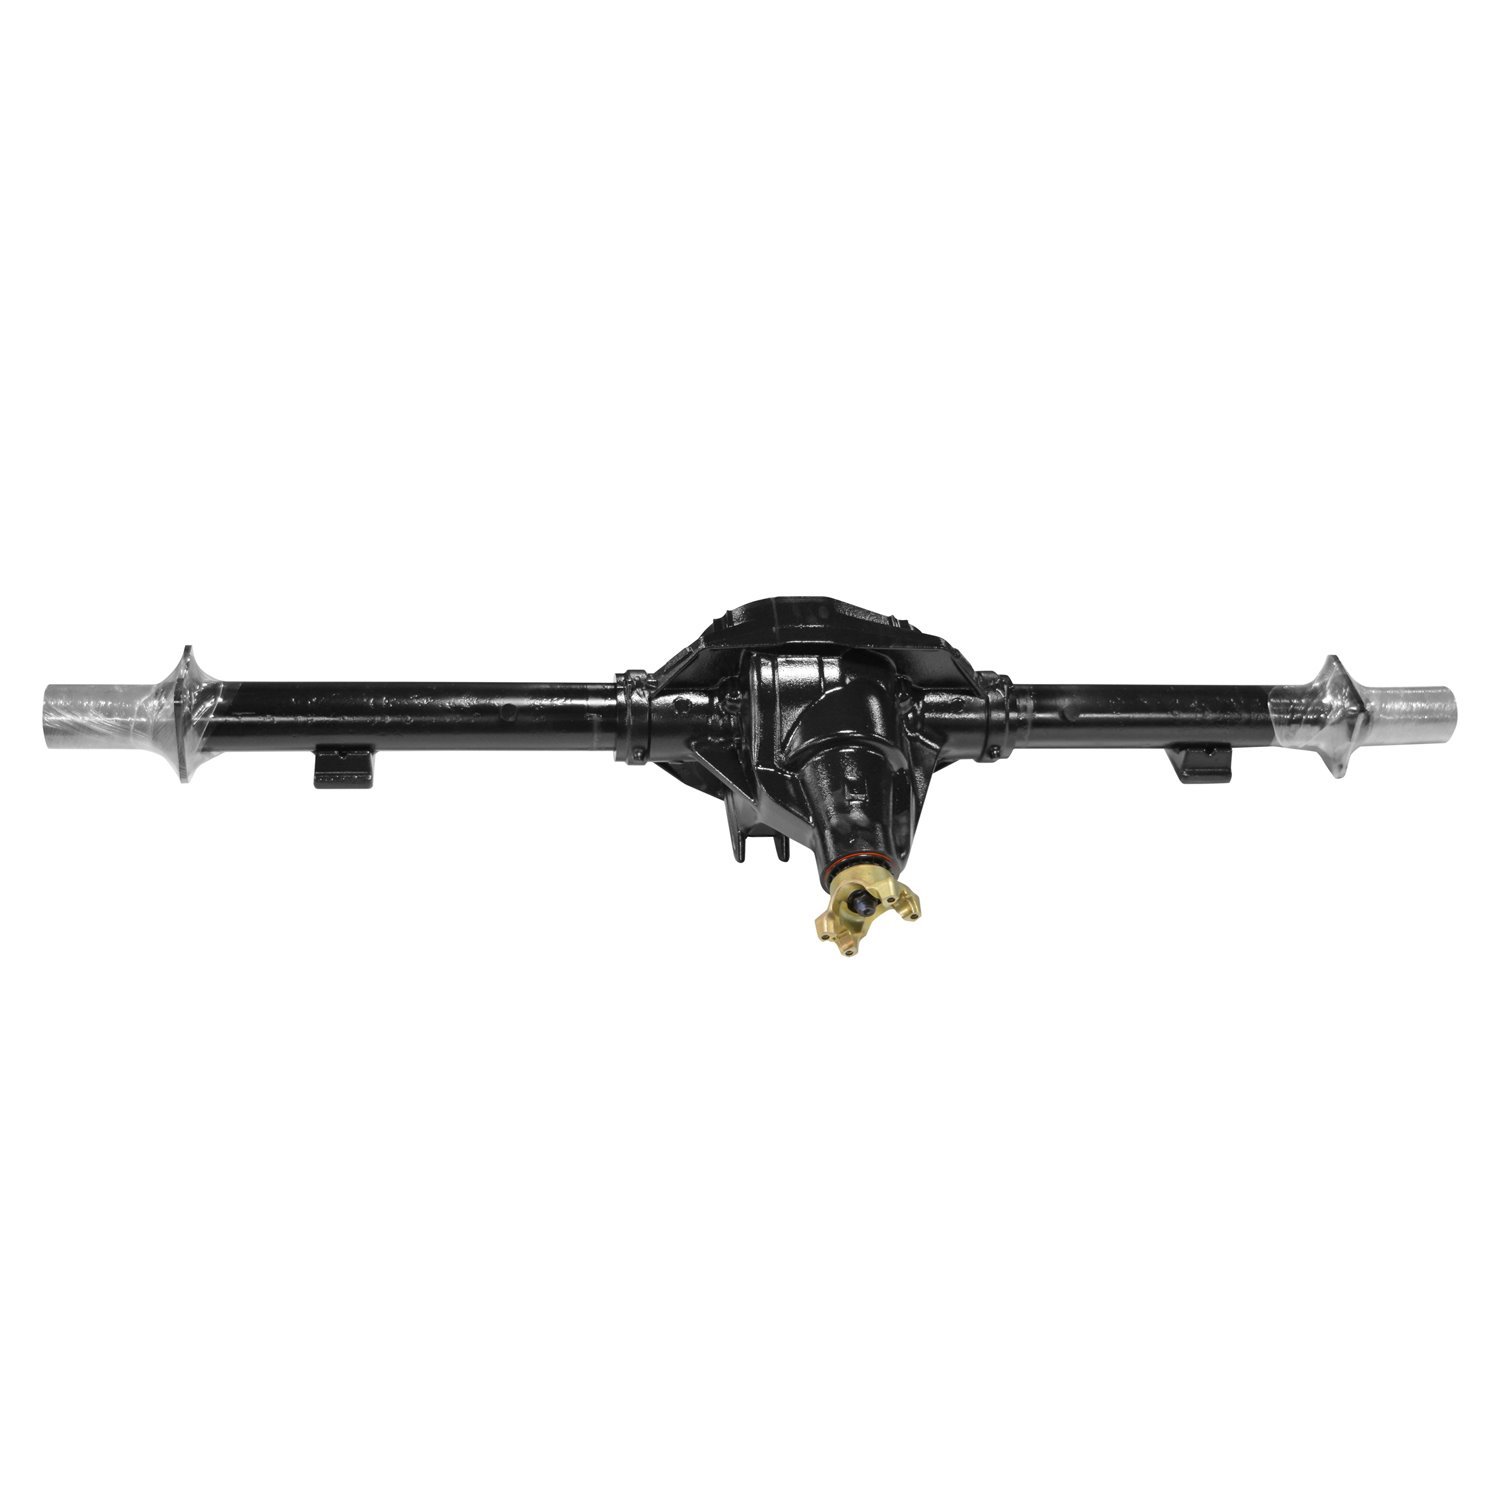 Remanufactured Axle Assy for 10.5", 00-04 Excursion, F250 & F350 4.30, SRW, U-Joint Yoke